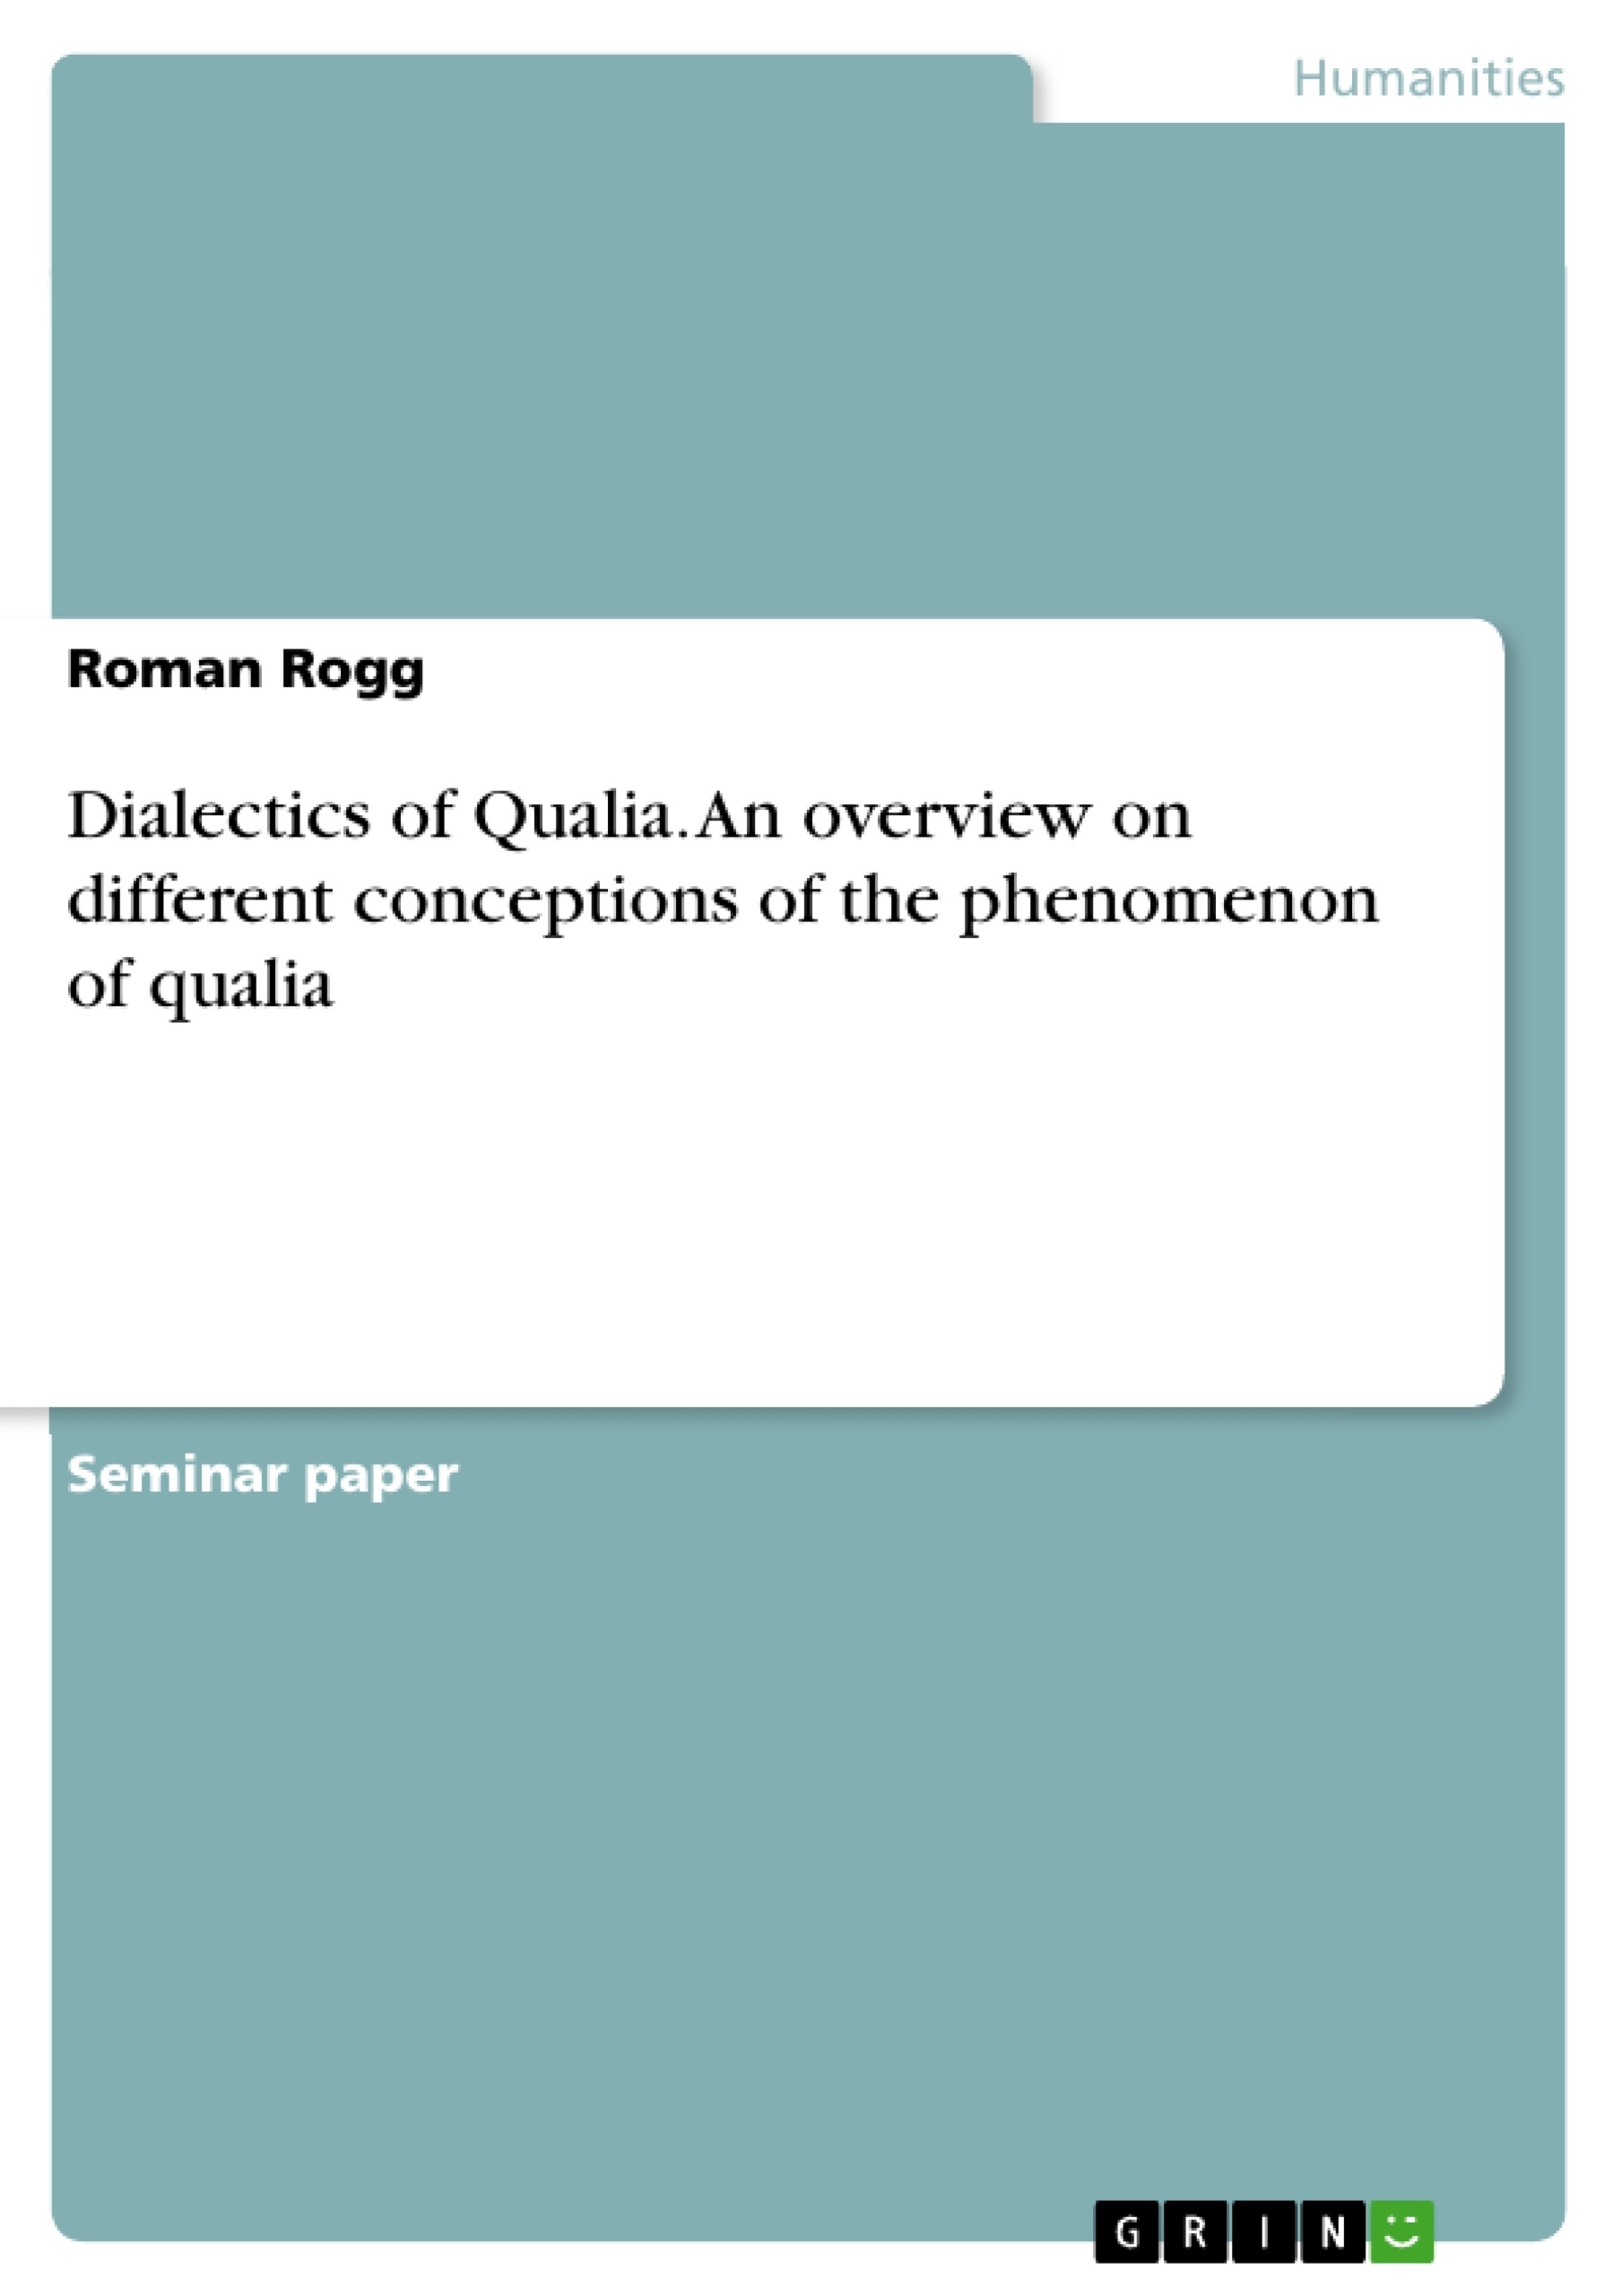 Title: Dialectics of Qualia. An overview on different conceptions of the phenomenon of qualia